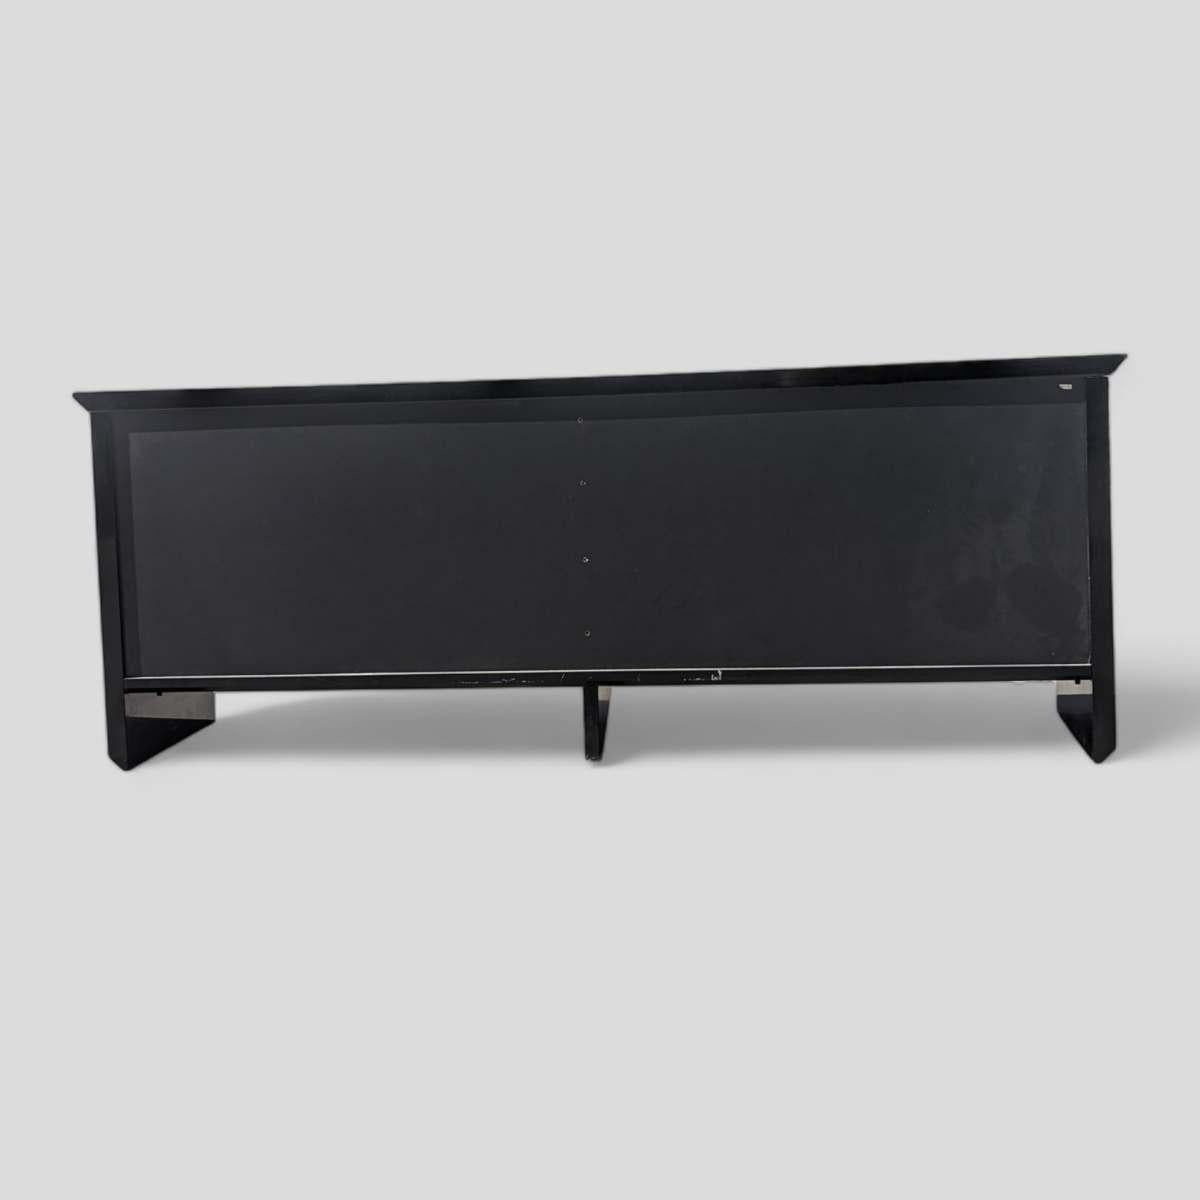 Giorgio Collection Italian Mid Century Modern Snakewood Black Lacquer In Good Condition For Sale In Rancho Cucamonga, CA